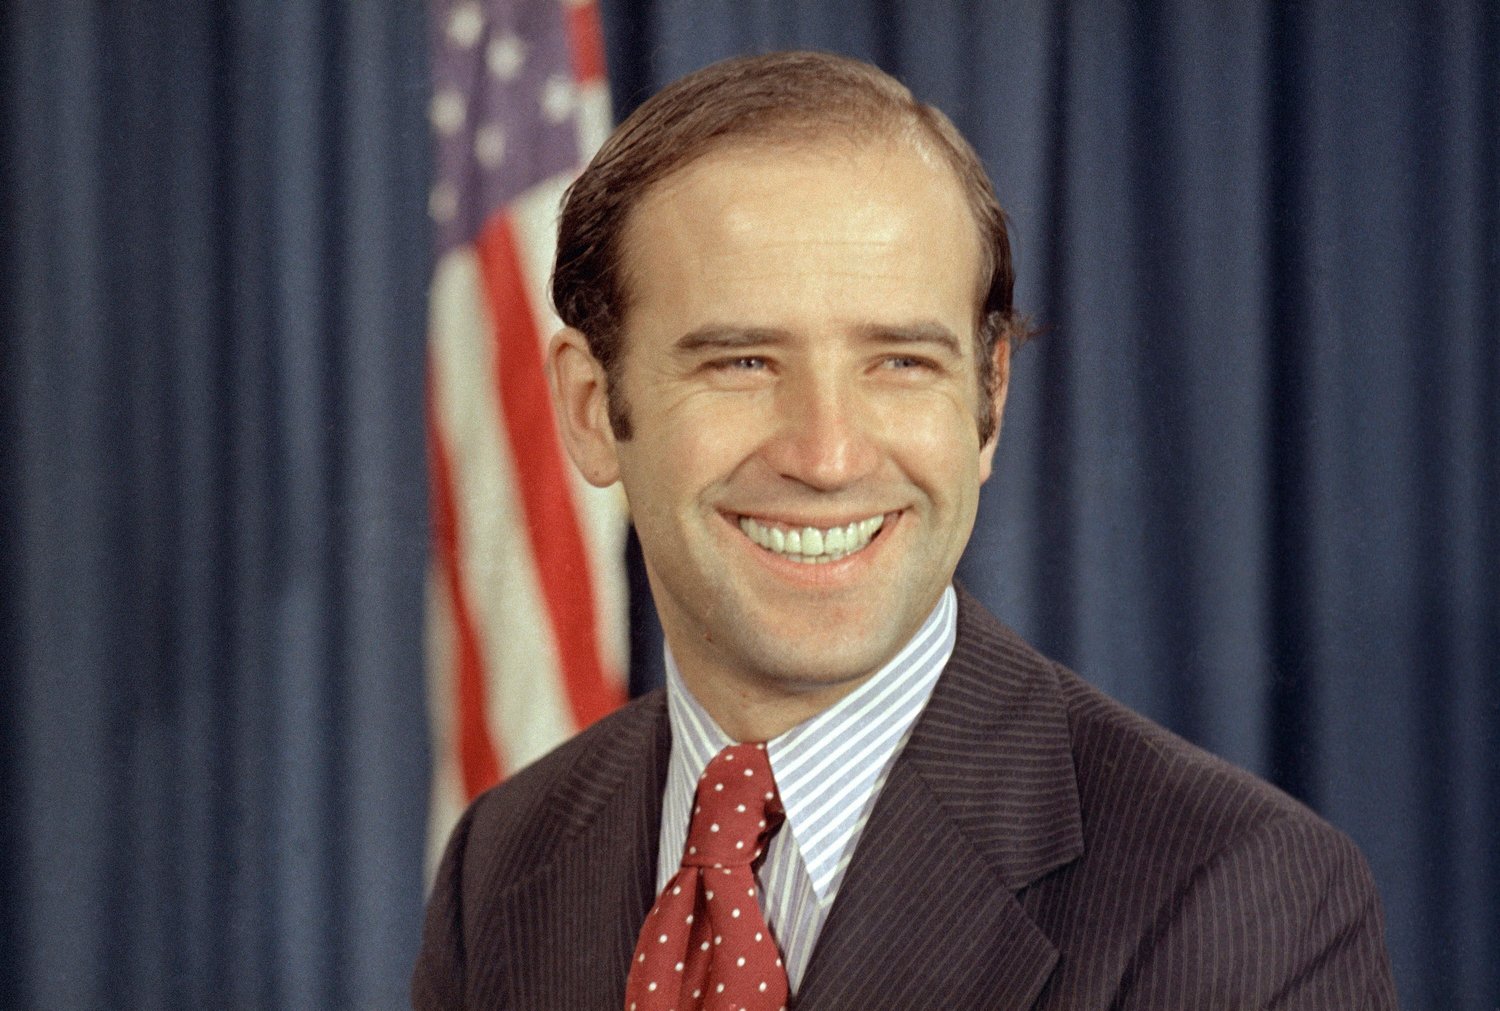 In this Dec. 13, 1972 file photo, the newly-elected Democratic senator from Delaware, Joe Biden, is shown on Capitol Hill in Washington. President-elect Biden turns 78 on Friday, Nov. 20, 2020. Biden turns 80 on Sunday, Nov. 20.